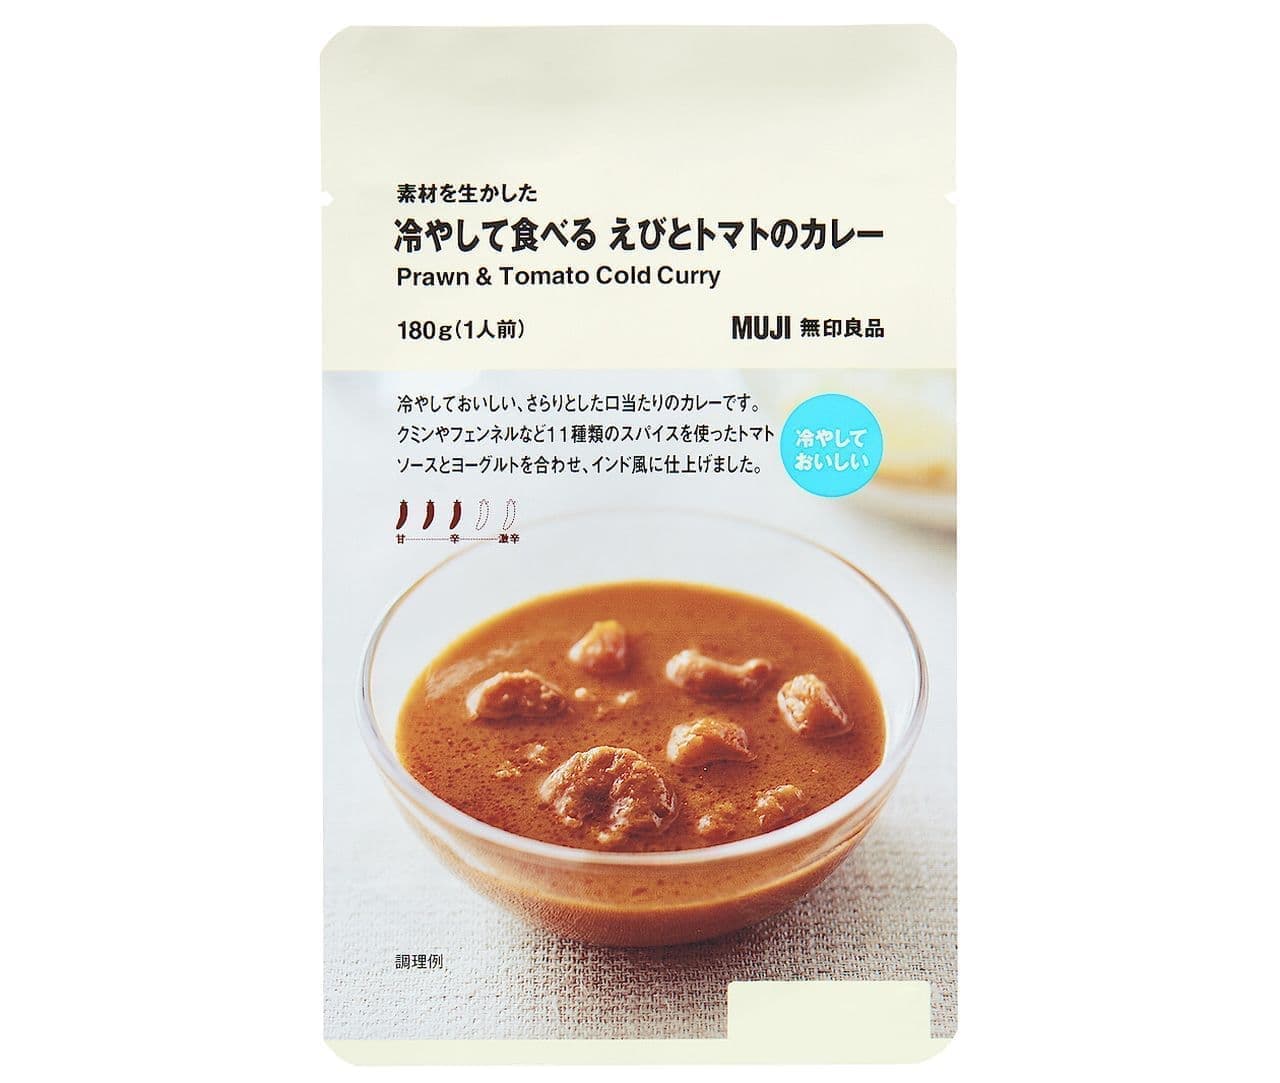 MUJI "Cold Shrimp and Tomato Curry with the Best Ingredients".